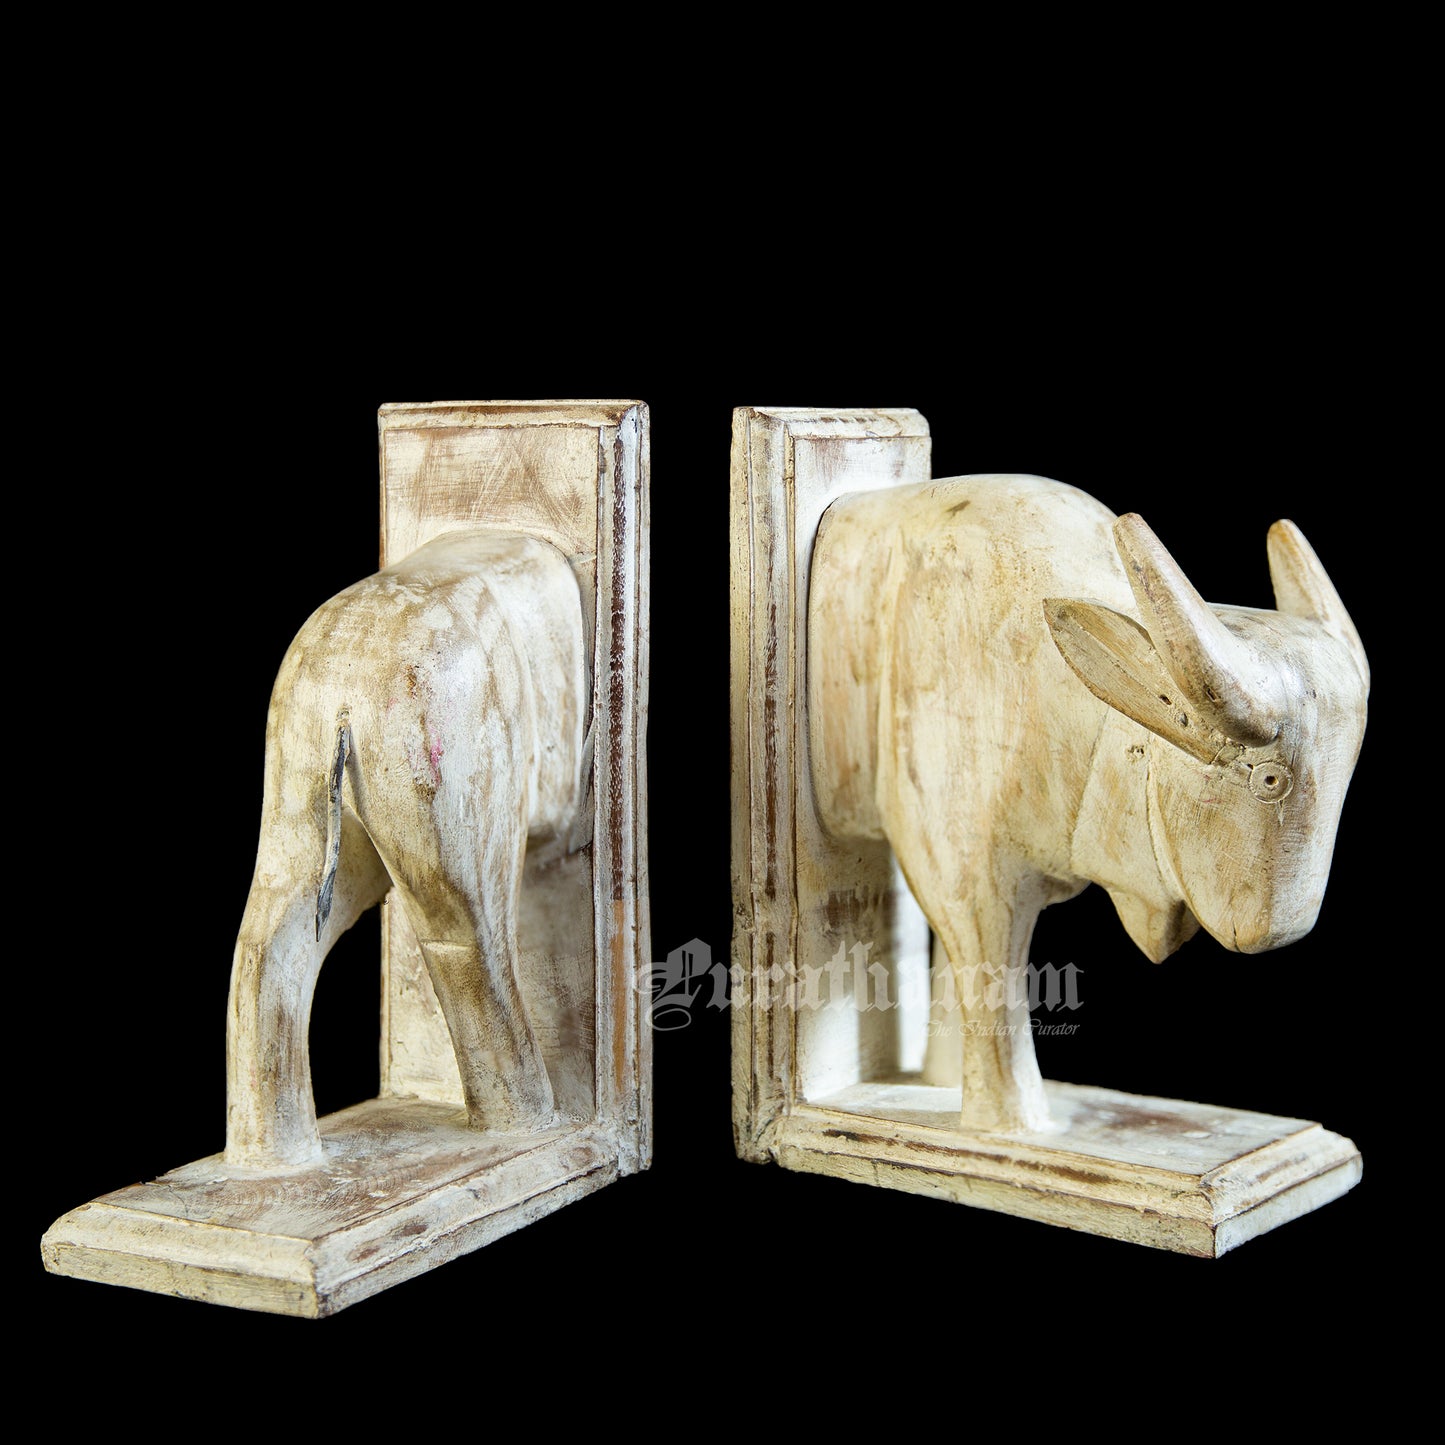 White Bull L Shaped Bookends